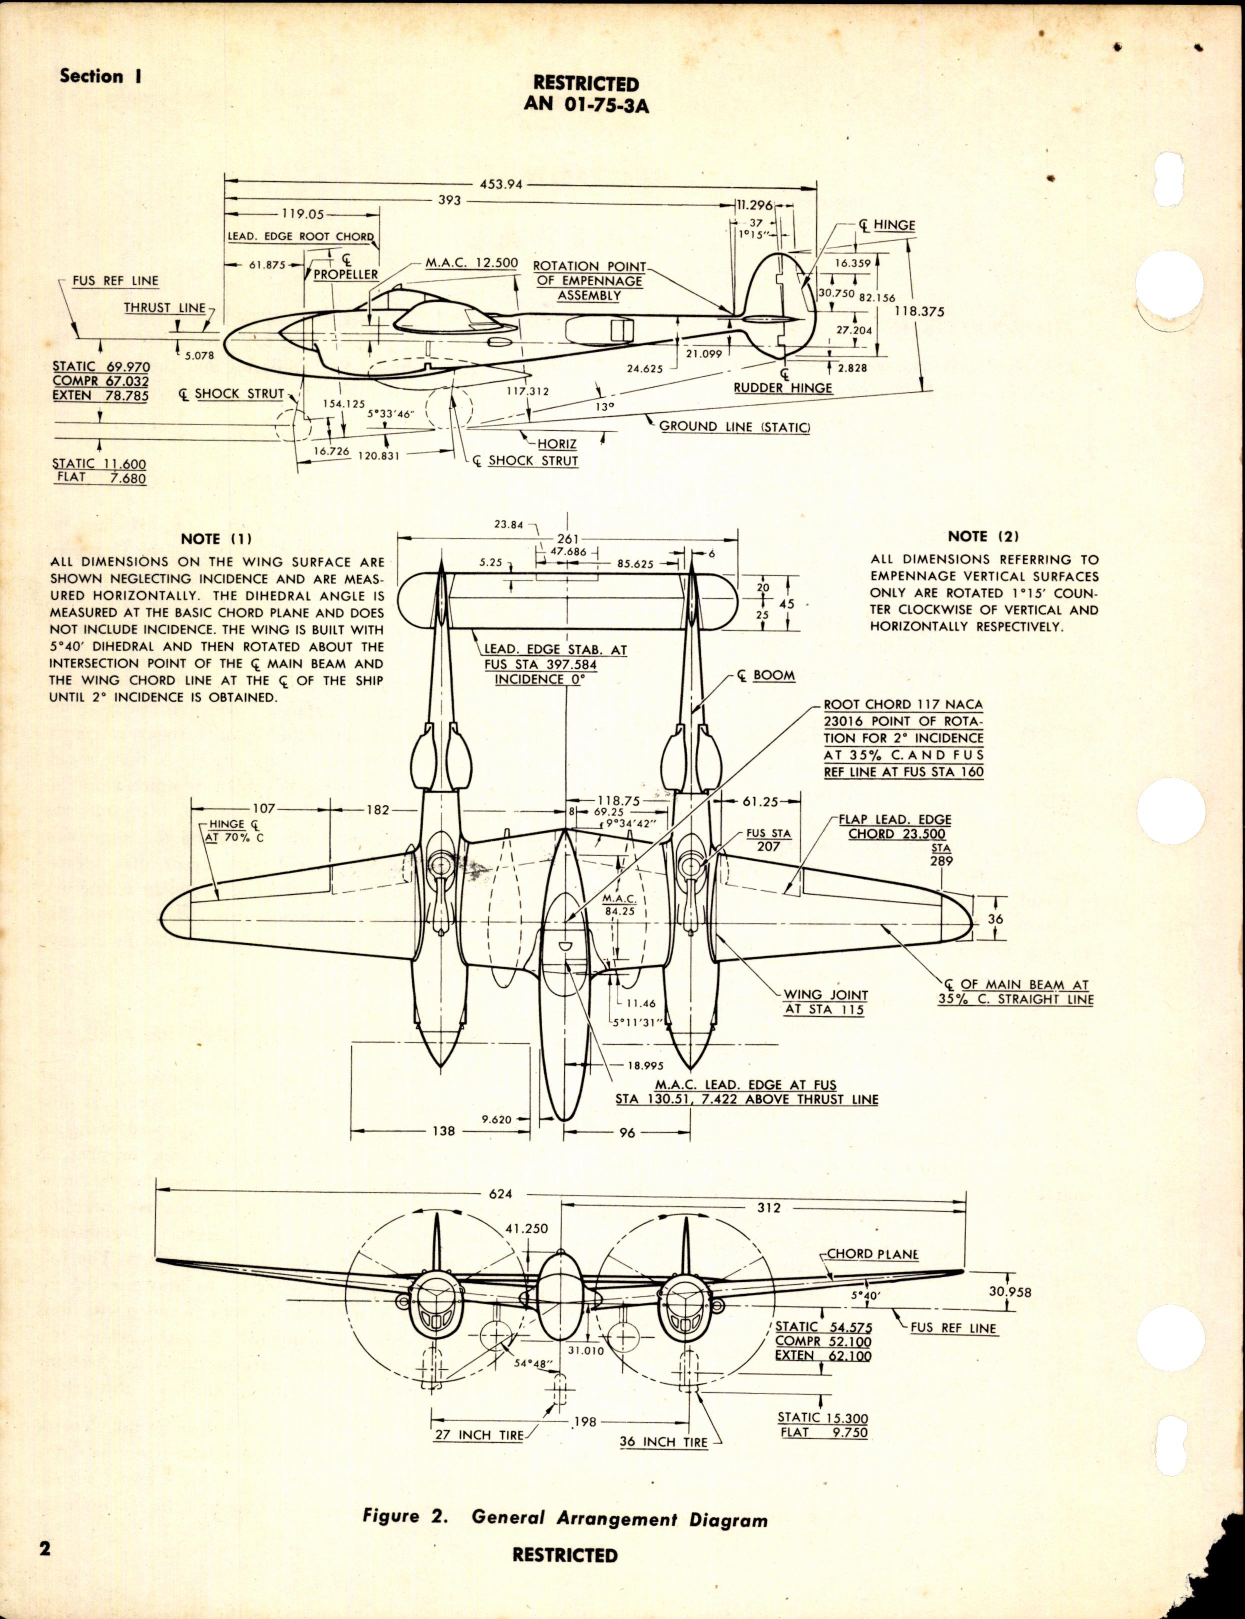 Sample page 8 from AirCorps Library document: Structural Repair Inst for P-38 Series thru P-38J-25, F-4, and F-5 Series